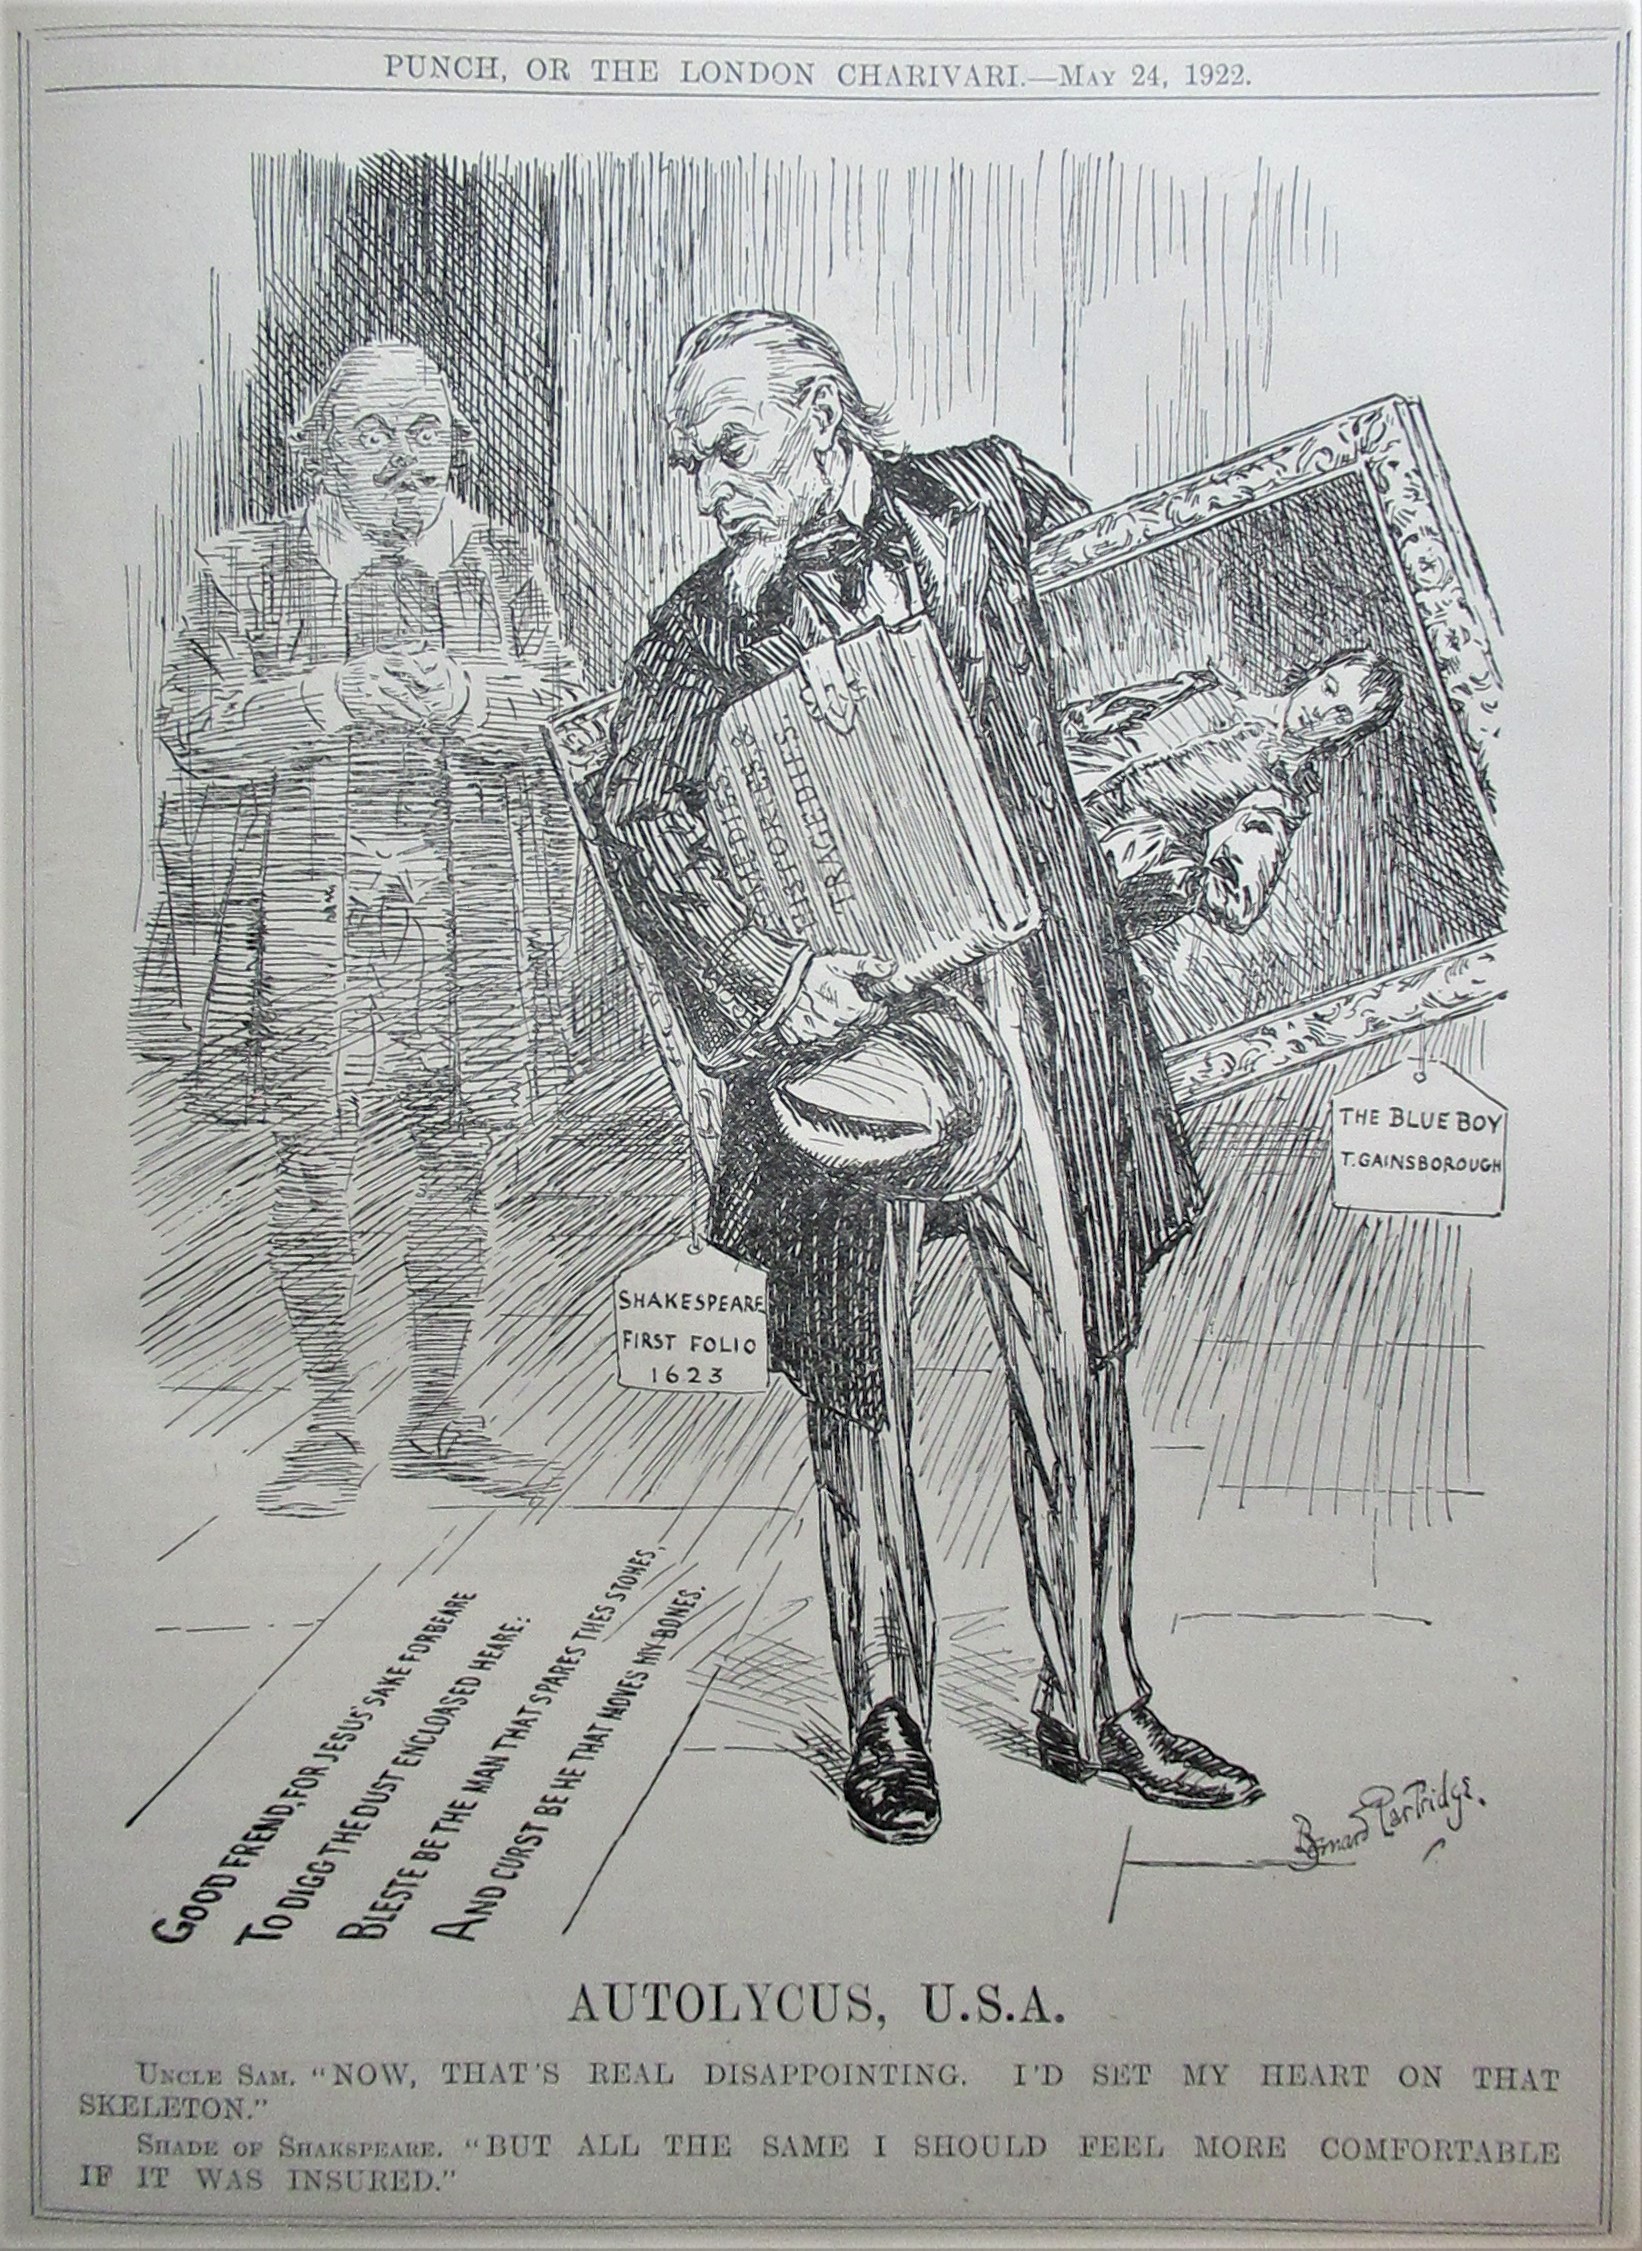 Punch cartoon showing Uncle Sam standing next to a gravestone with British cultural treasures under his arm as ghost of William Shakespeare looks on. Uncle Sam says, "Now, that's real disappointing. I had my heart set on that skeleton." Shakespeare replies, "But all the same I should feel more comfortable if it was insured."